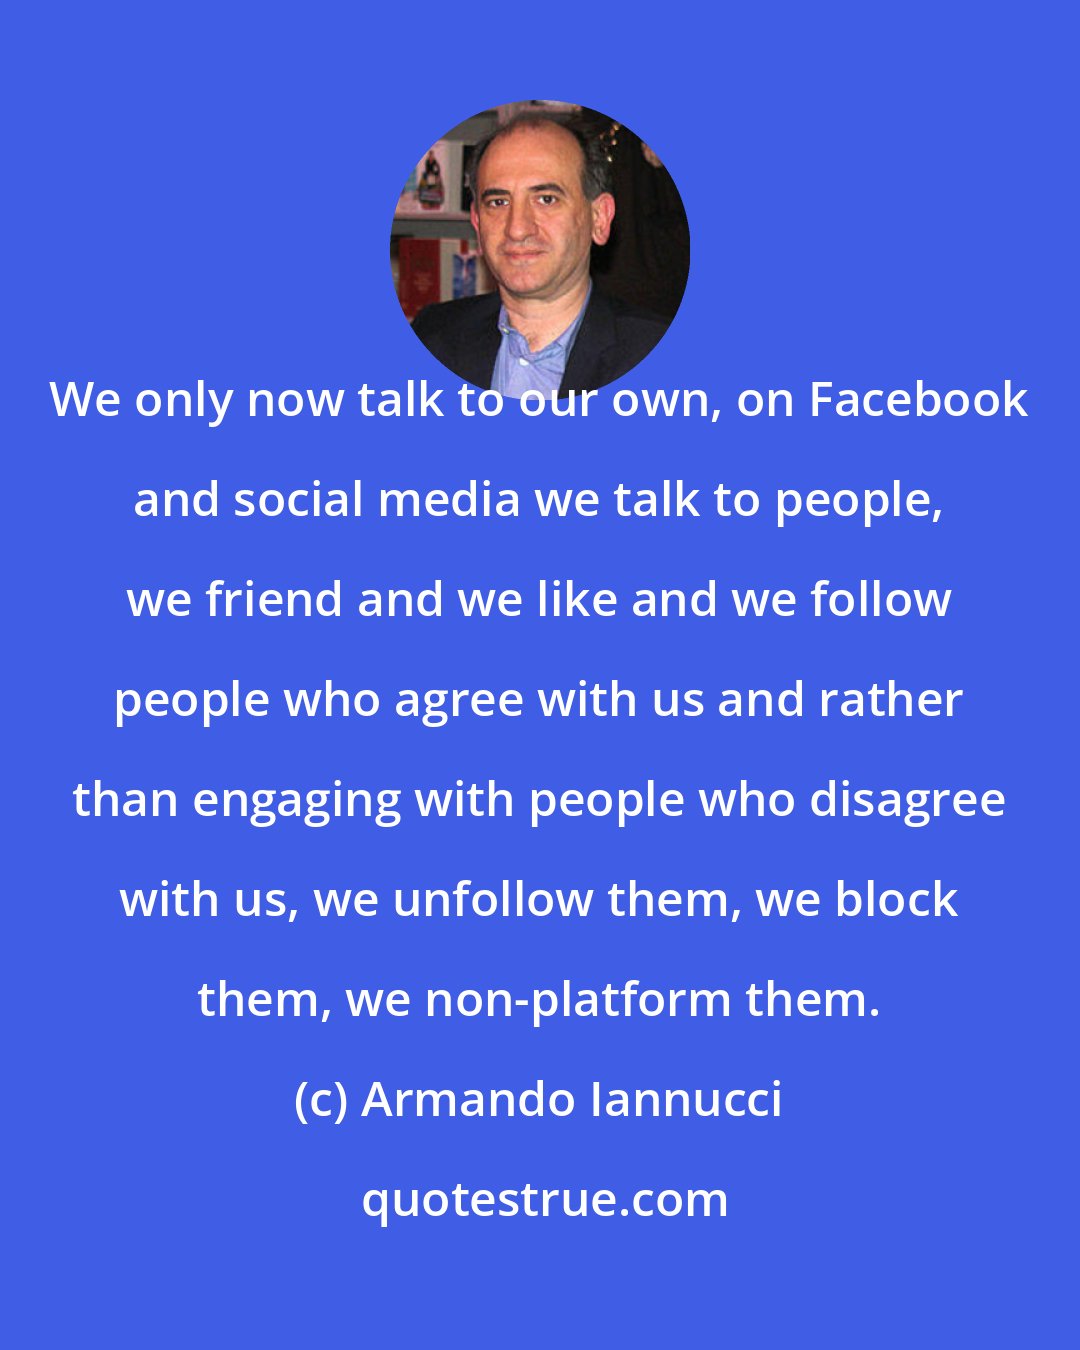 Armando Iannucci: We only now talk to our own, on Facebook and social media we talk to people, we friend and we like and we follow people who agree with us and rather than engaging with people who disagree with us, we unfollow them, we block them, we non-platform them.